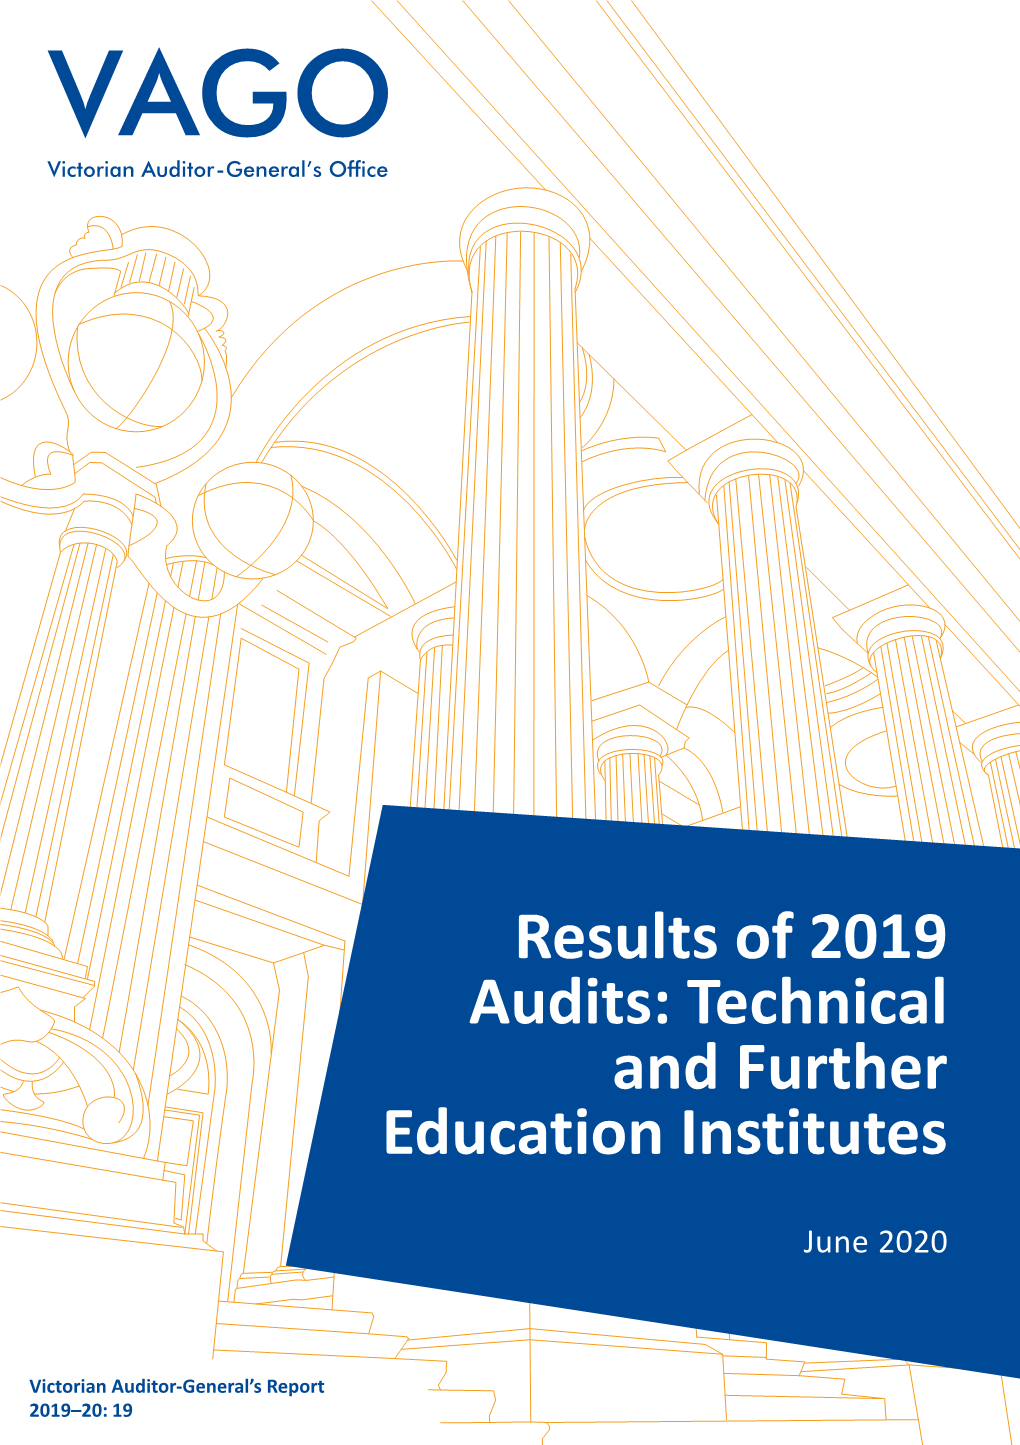 Results of 2019 Audits: Technical and Further Education Institutes Education Further Technical and 2019 of Audits: Results